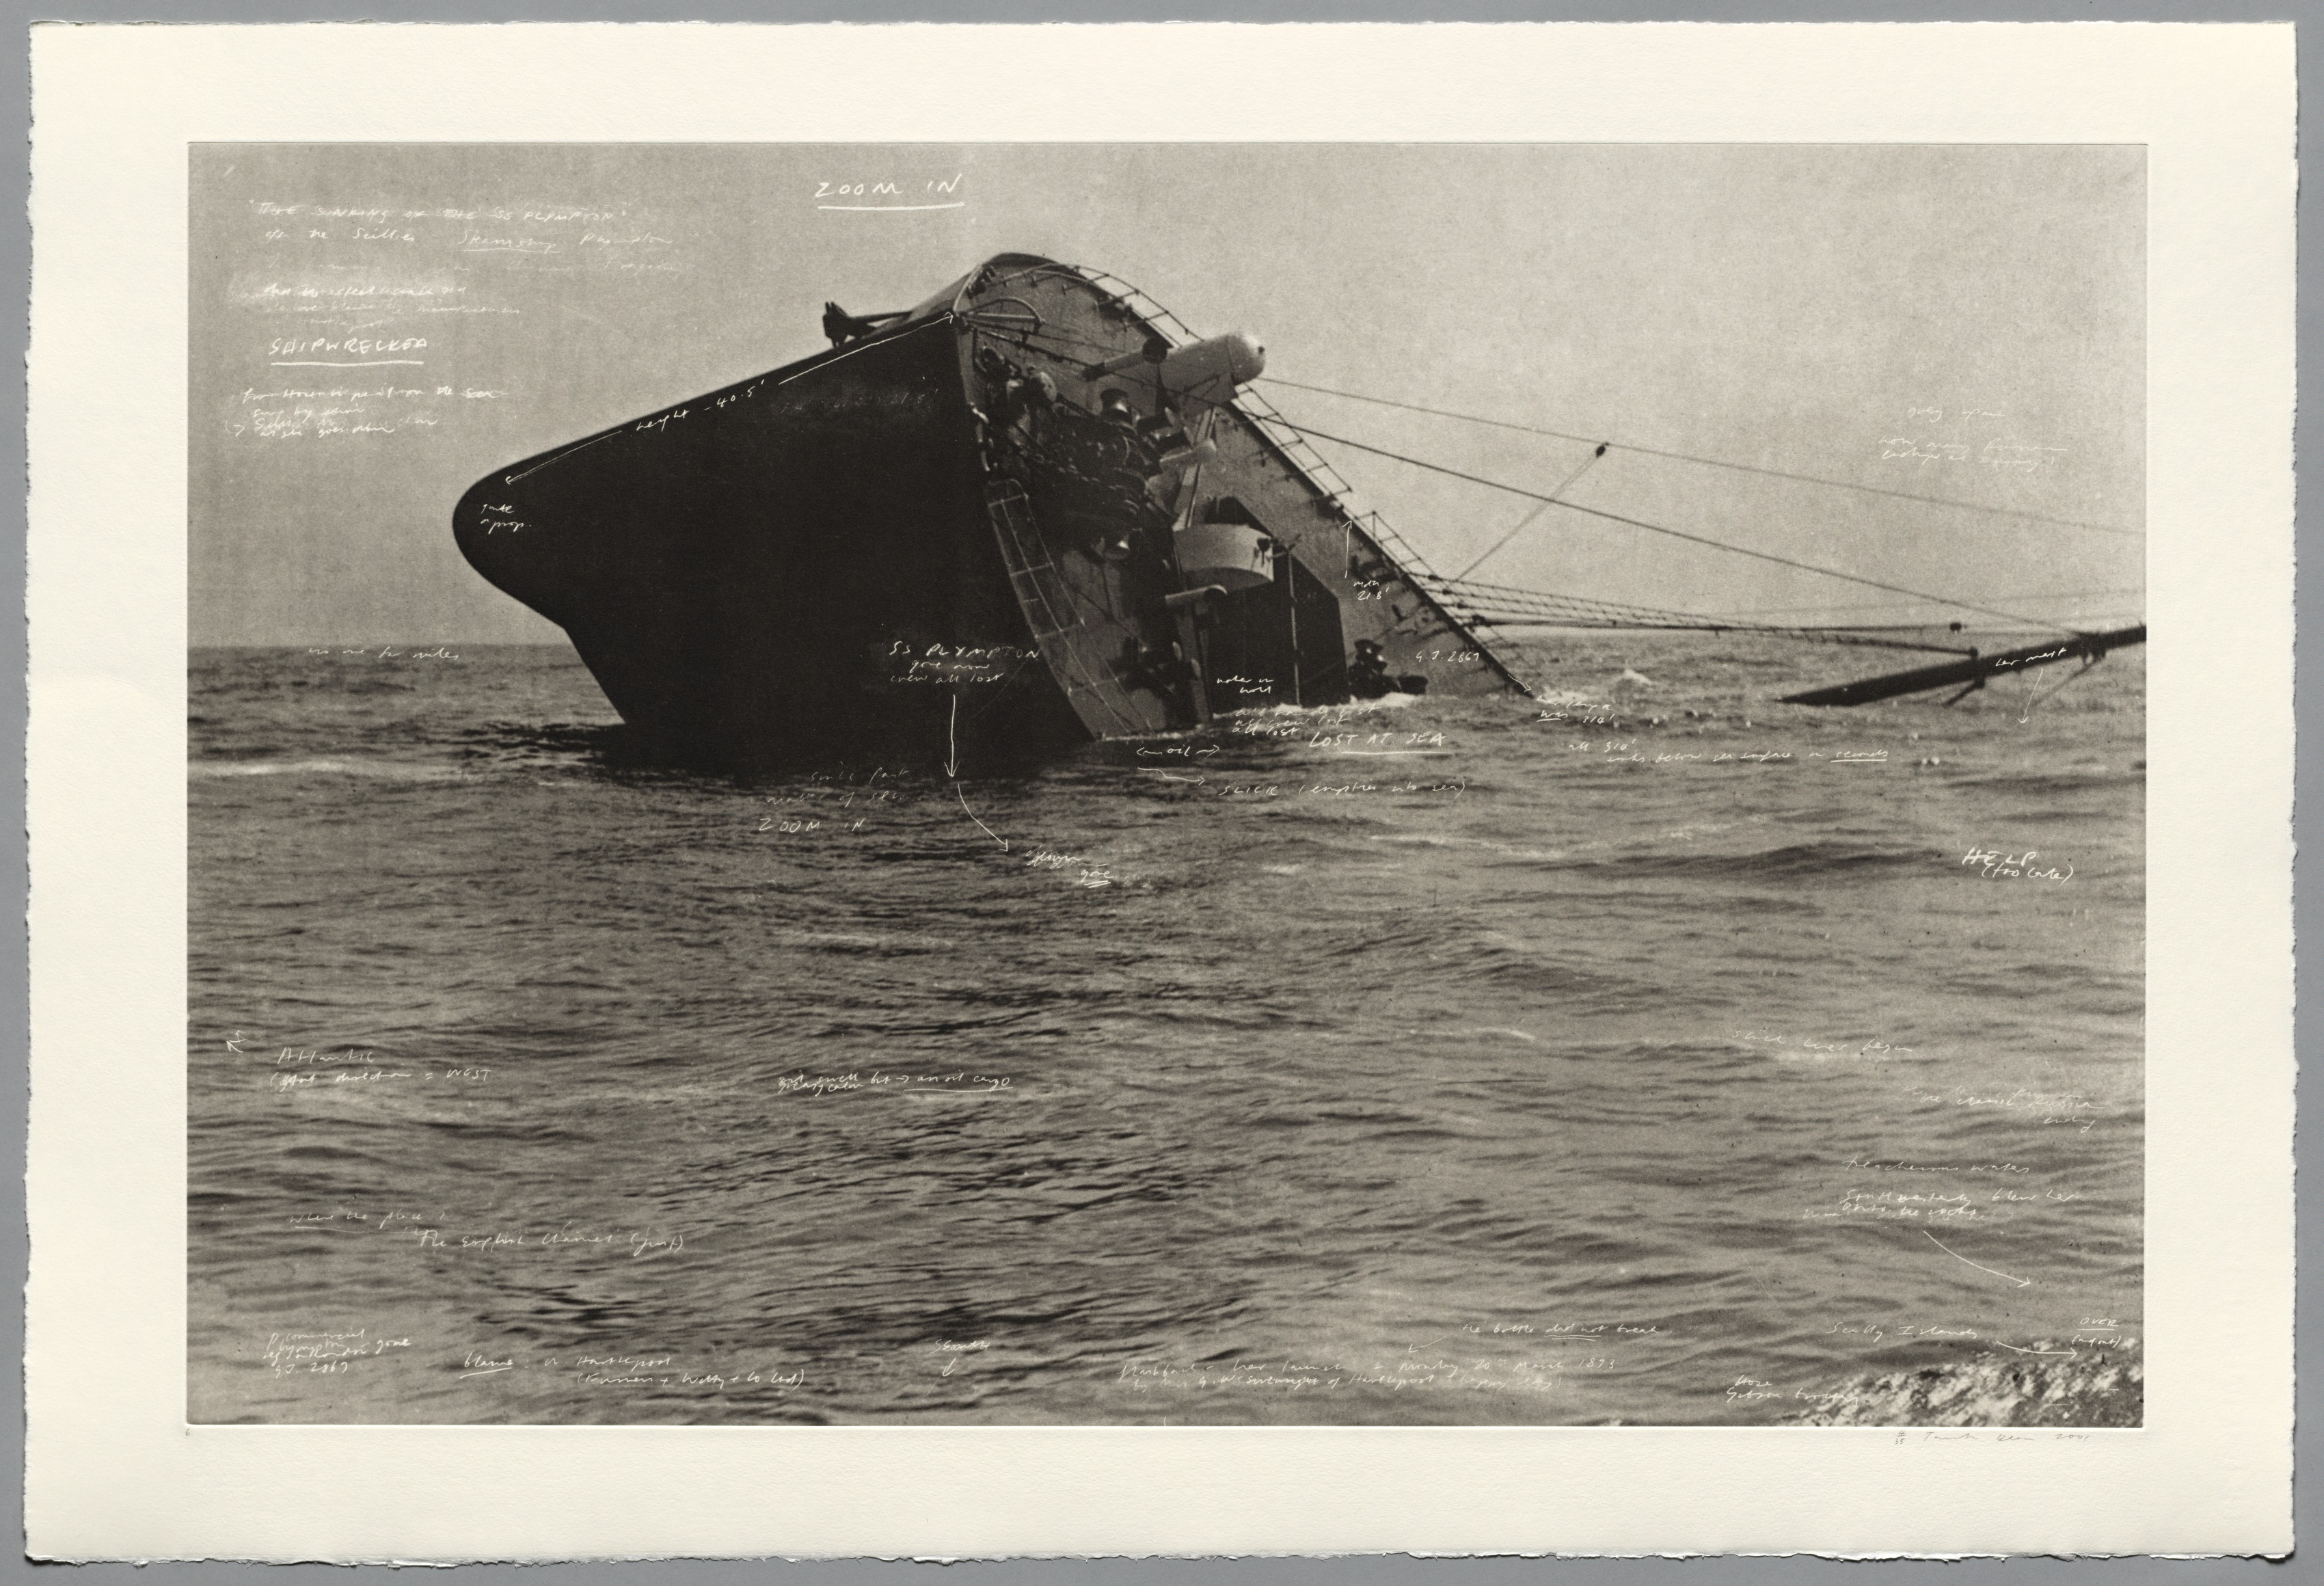 The Russian Ending: Sinking of the SS Plympton